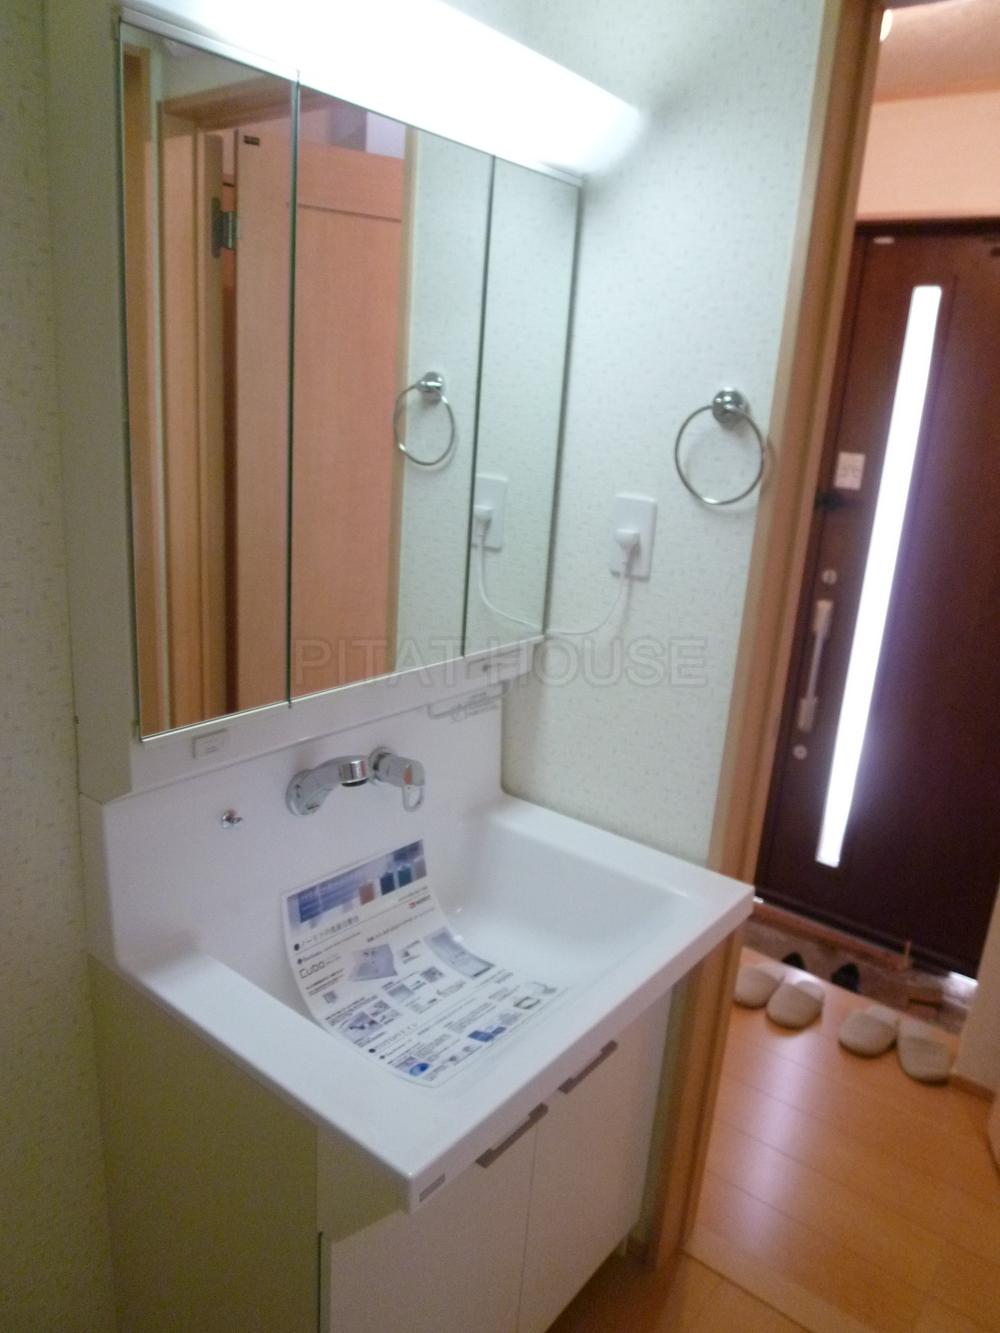 Wash basin, toilet.  ◆ Vanity is vanity with easy-to-use three-sided mirror.